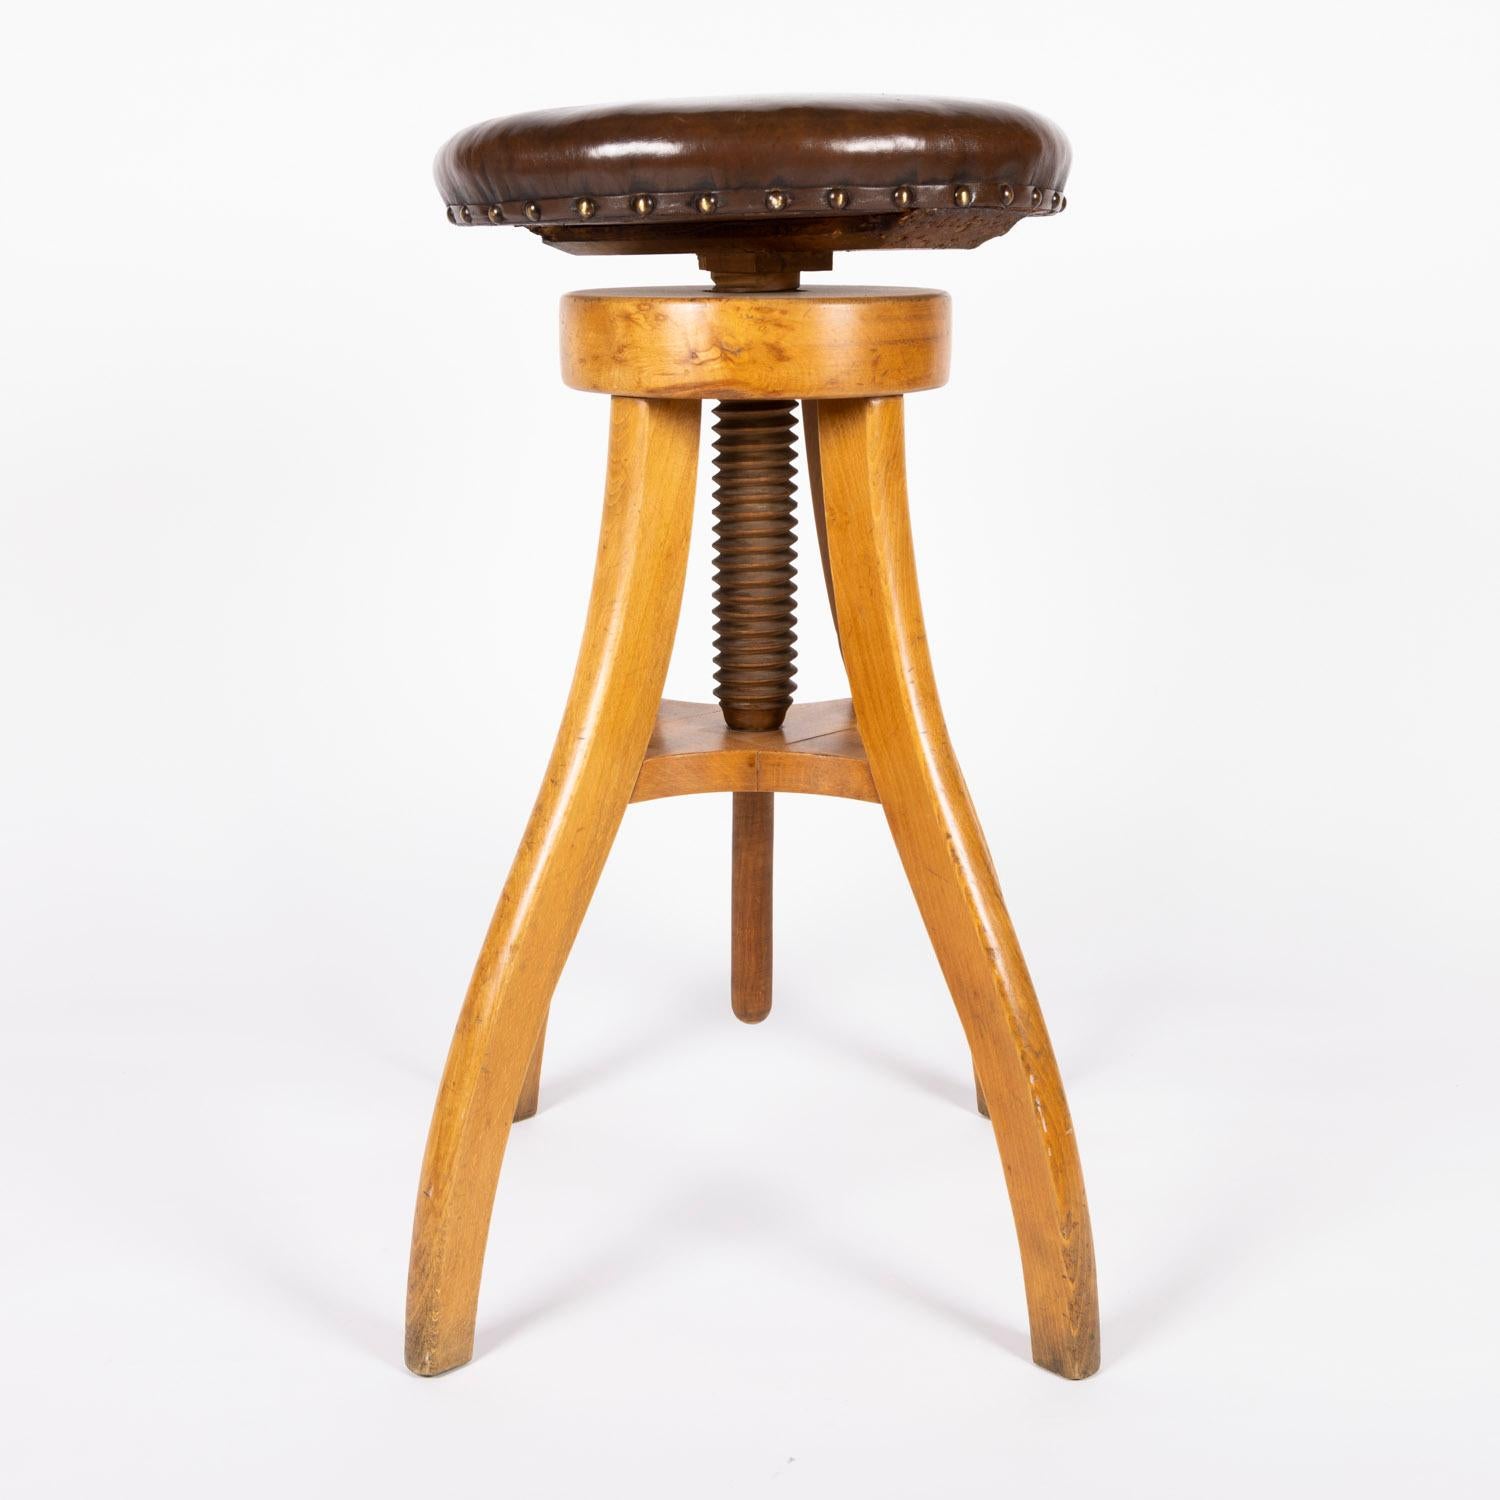 An early 20th century Danish bar stool of adjustable height with brown leather circular seat.

Measures: Height: 29 inches / 74 cm. (at Highest: 37 inches / 94 cm).



 